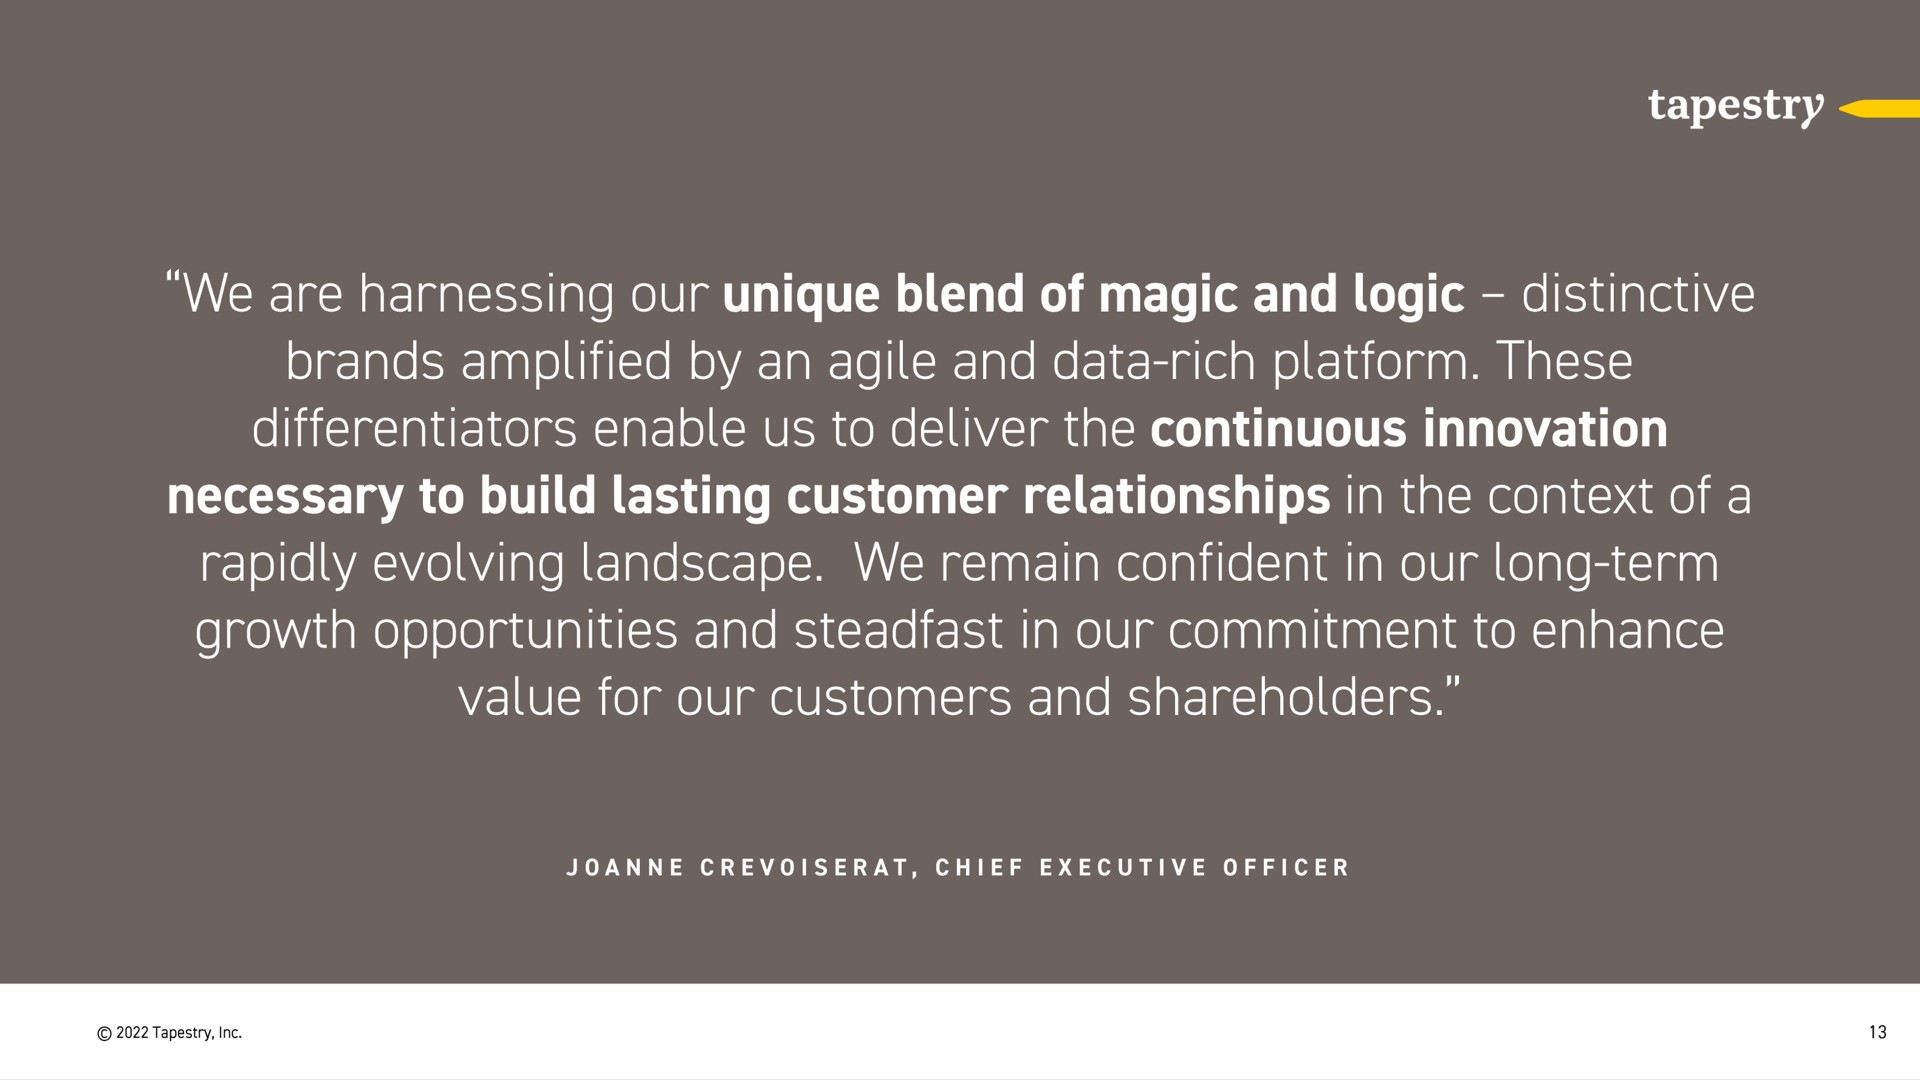 we are harnessing our unique blend of magic and logic distinctive brands amplified by an agile and data rich platform these differentiators enable us to deliver the continuous innovation necessary to build lasting customer relationships in the context of a rapidly evolving landscape we remain confident in our long term growth opportunities and steadfast in our commitment to enhance value for our customers and shareholders | Tapestry